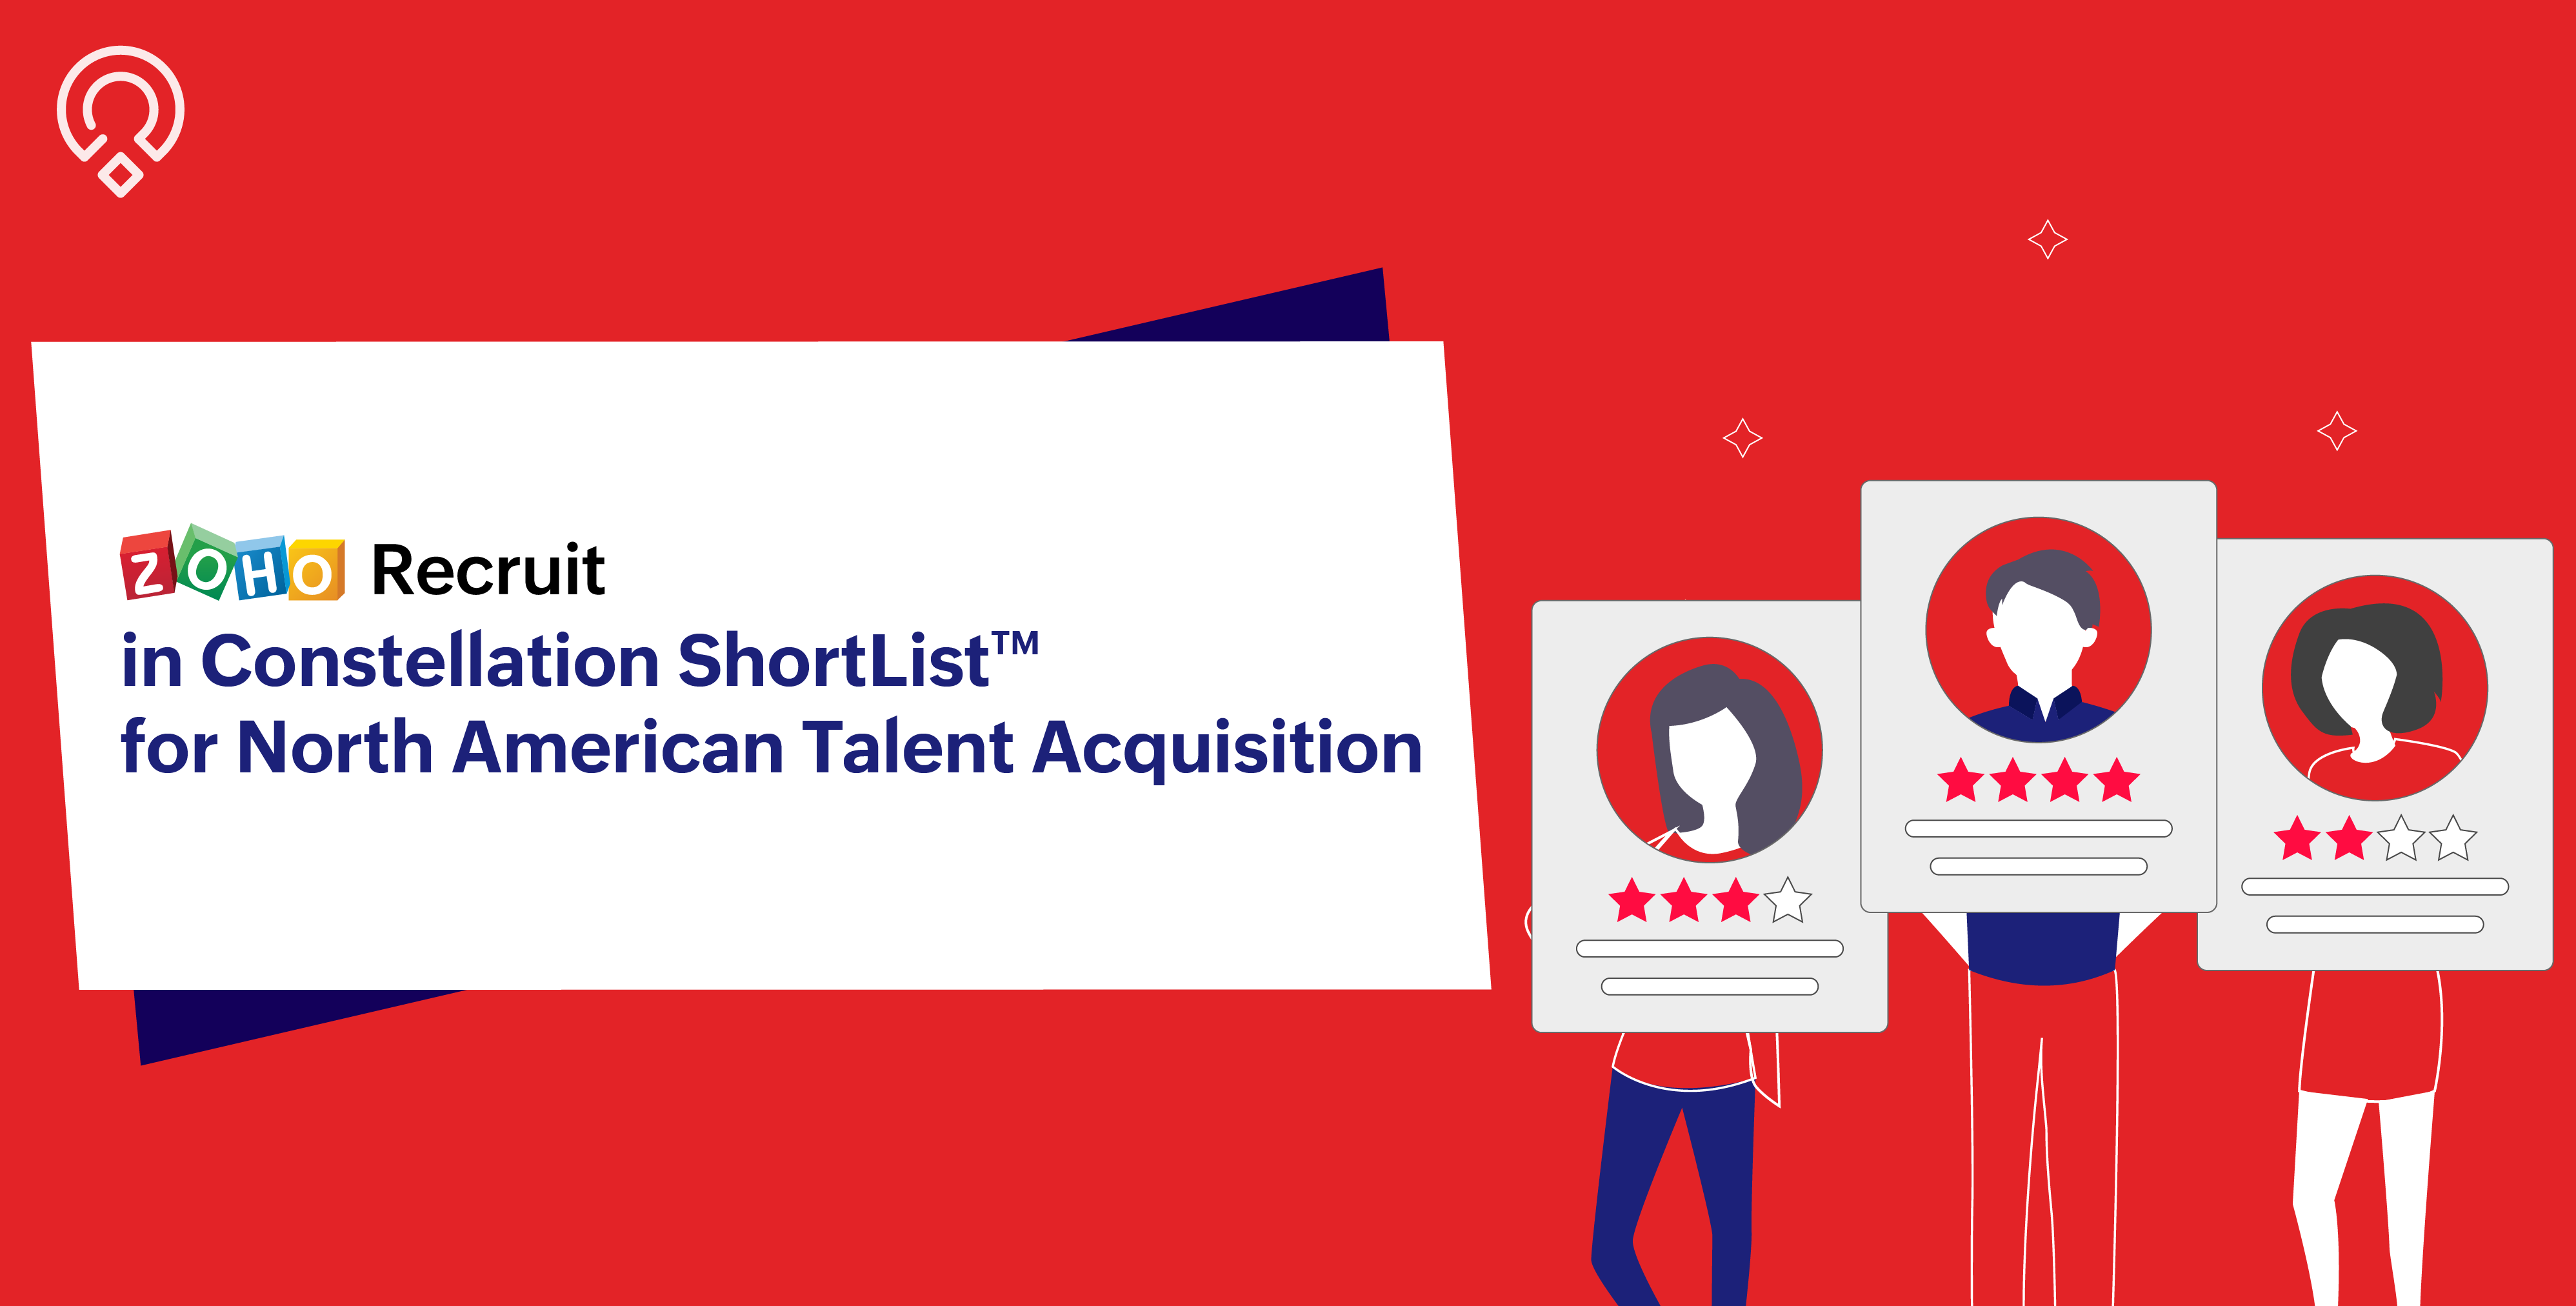 Zoho Recruit shortlisted as leading talent acquisition software